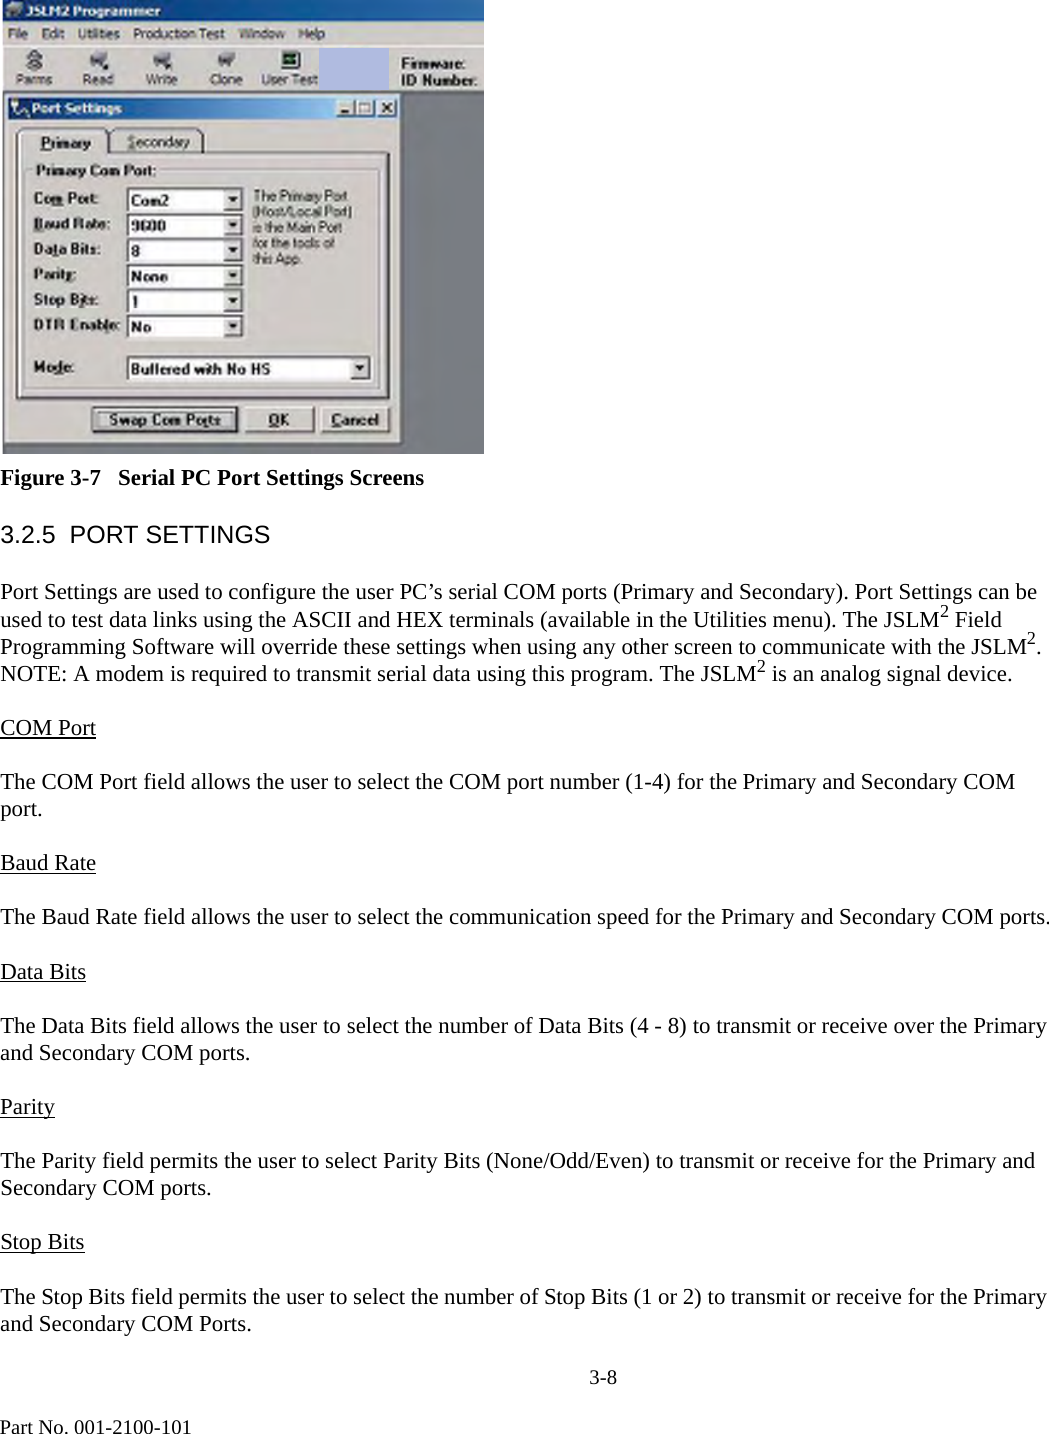                              3-8Part No. 001-2100-101Figure 3-7   Serial PC Port Settings Screens3.2.5  PORT SETTINGSPort Settings are used to configure the user PC’s serial COM ports (Primary and Secondary). Port Settings can be used to test data links using the ASCII and HEX terminals (available in the Utilities menu). The JSLM2 Field Programming Software will override these settings when using any other screen to communicate with the JSLM2. NOTE: A modem is required to transmit serial data using this program. The JSLM2 is an analog signal device. COM PortThe COM Port field allows the user to select the COM port number (1-4) for the Primary and Secondary COM port.Baud RateThe Baud Rate field allows the user to select the communication speed for the Primary and Secondary COM ports.Data BitsThe Data Bits field allows the user to select the number of Data Bits (4 - 8) to transmit or receive over the Primary and Secondary COM ports.ParityThe Parity field permits the user to select Parity Bits (None/Odd/Even) to transmit or receive for the Primary and Secondary COM ports.Stop BitsThe Stop Bits field permits the user to select the number of Stop Bits (1 or 2) to transmit or receive for the Primary and Secondary COM Ports.